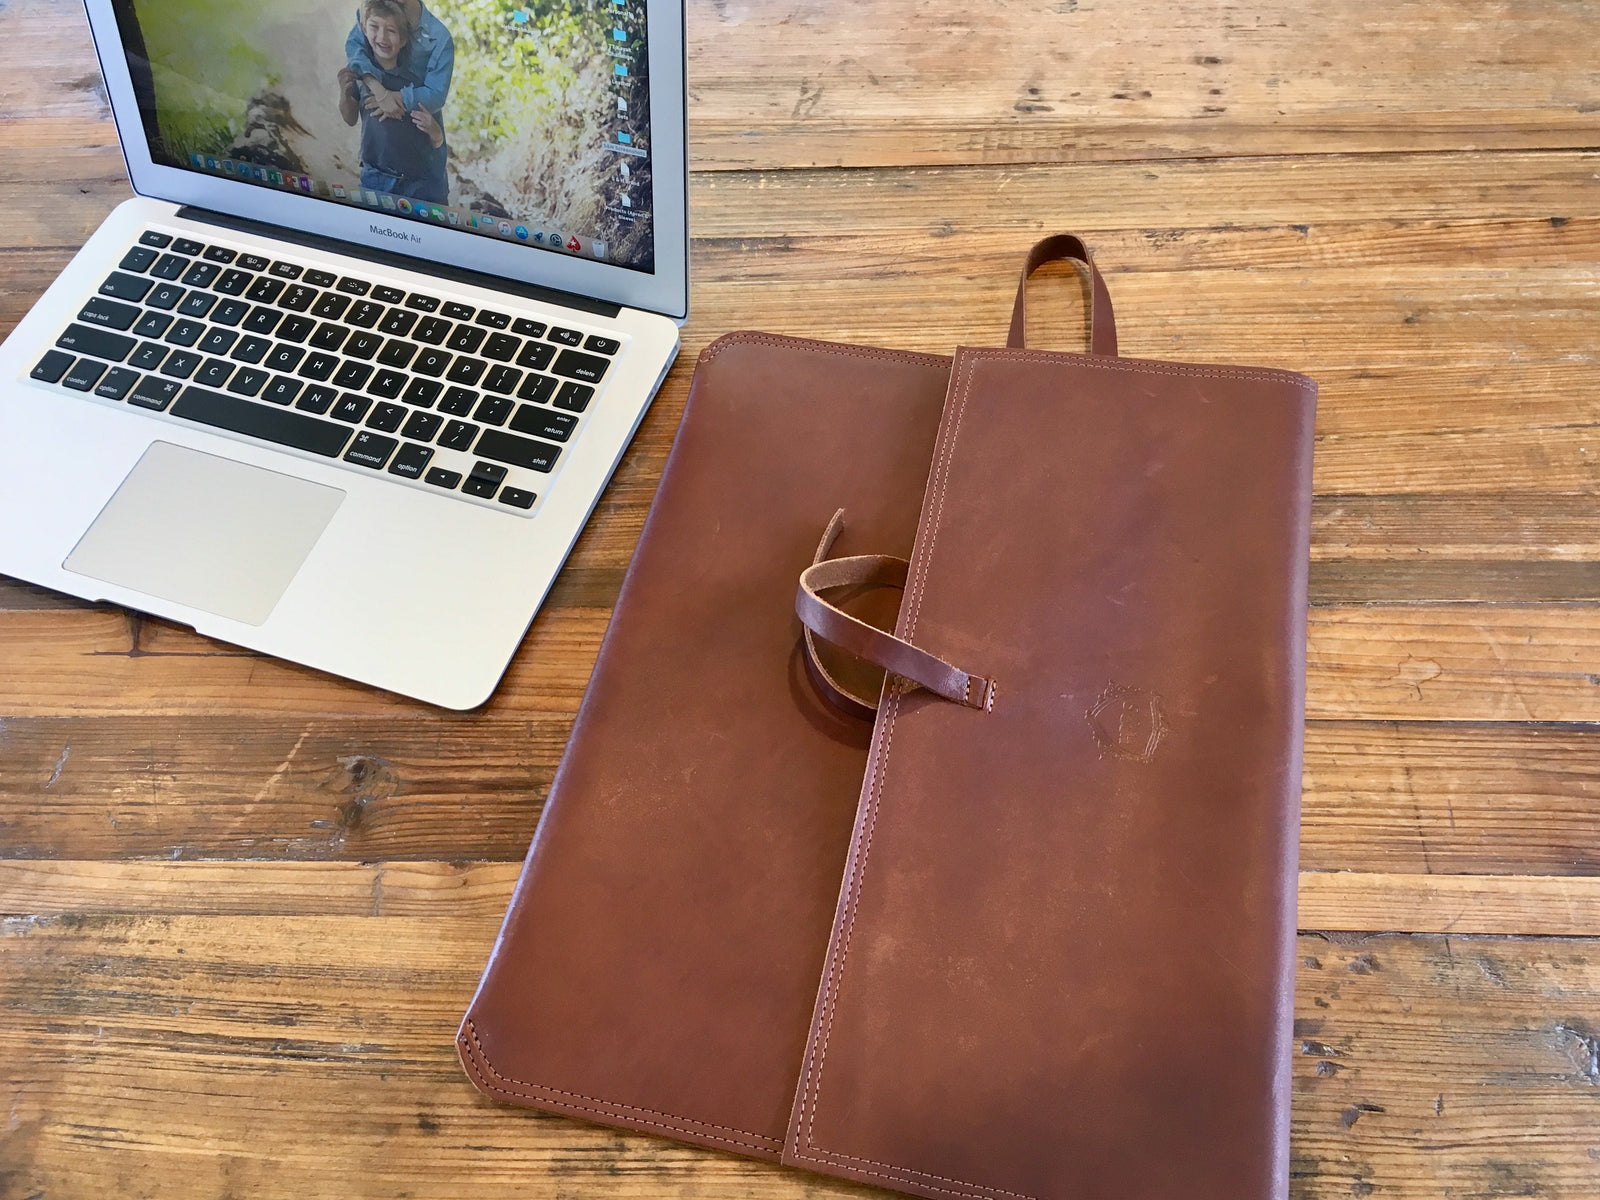 Leather Laptop Sleeve - Swagger & Hide | Our leather luggage accessories and leather travel bags make the perfect gift for him!  All of our products are handcrafted and personalised.